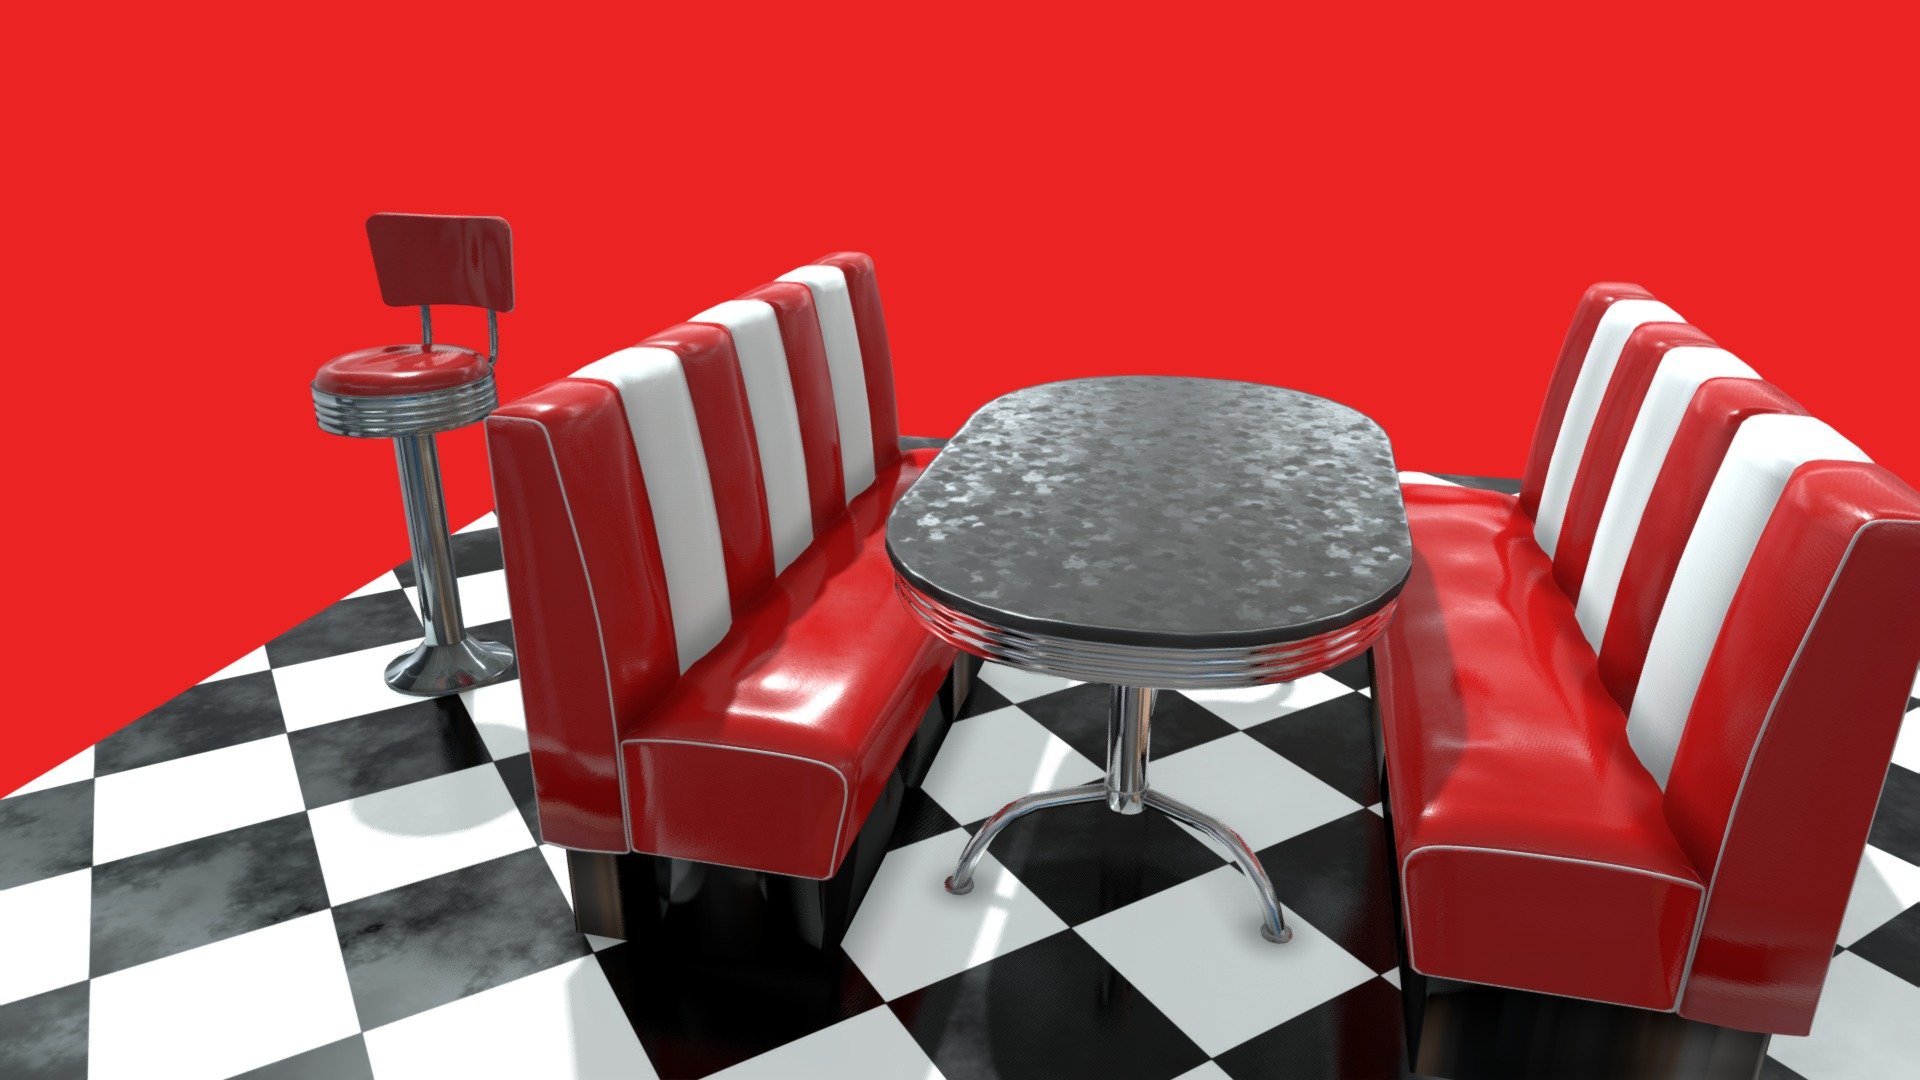 Specs:

One material per object, optimized for games
Bench - 4684 triangles
Table - 1756 triangles
Stool - 3319 triangles
PBR textures (metallic roughness)

Notes:
Send me a PM for the Substance Painter source files - Retro Diner - Furniture Pack - Buy Royalty Free 3D model by jelsadones 3d model